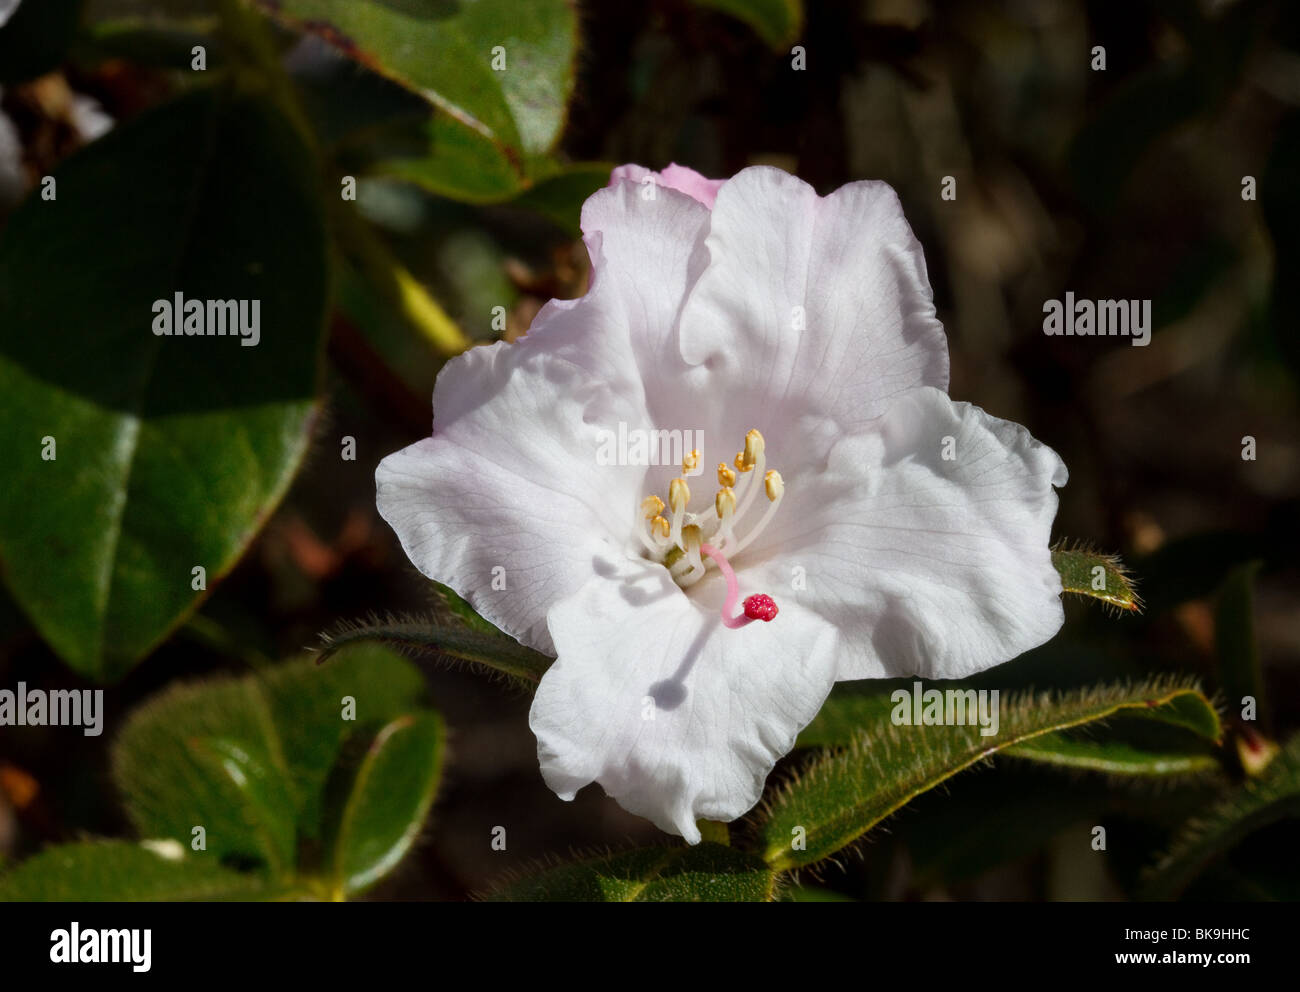 Flowering flowers of Rhododendron Ciliatum, species native to eastern Nepal, Bhutan, Tibet, and Xizang in China at Dundee Botanical gardens. UK Stock Photo